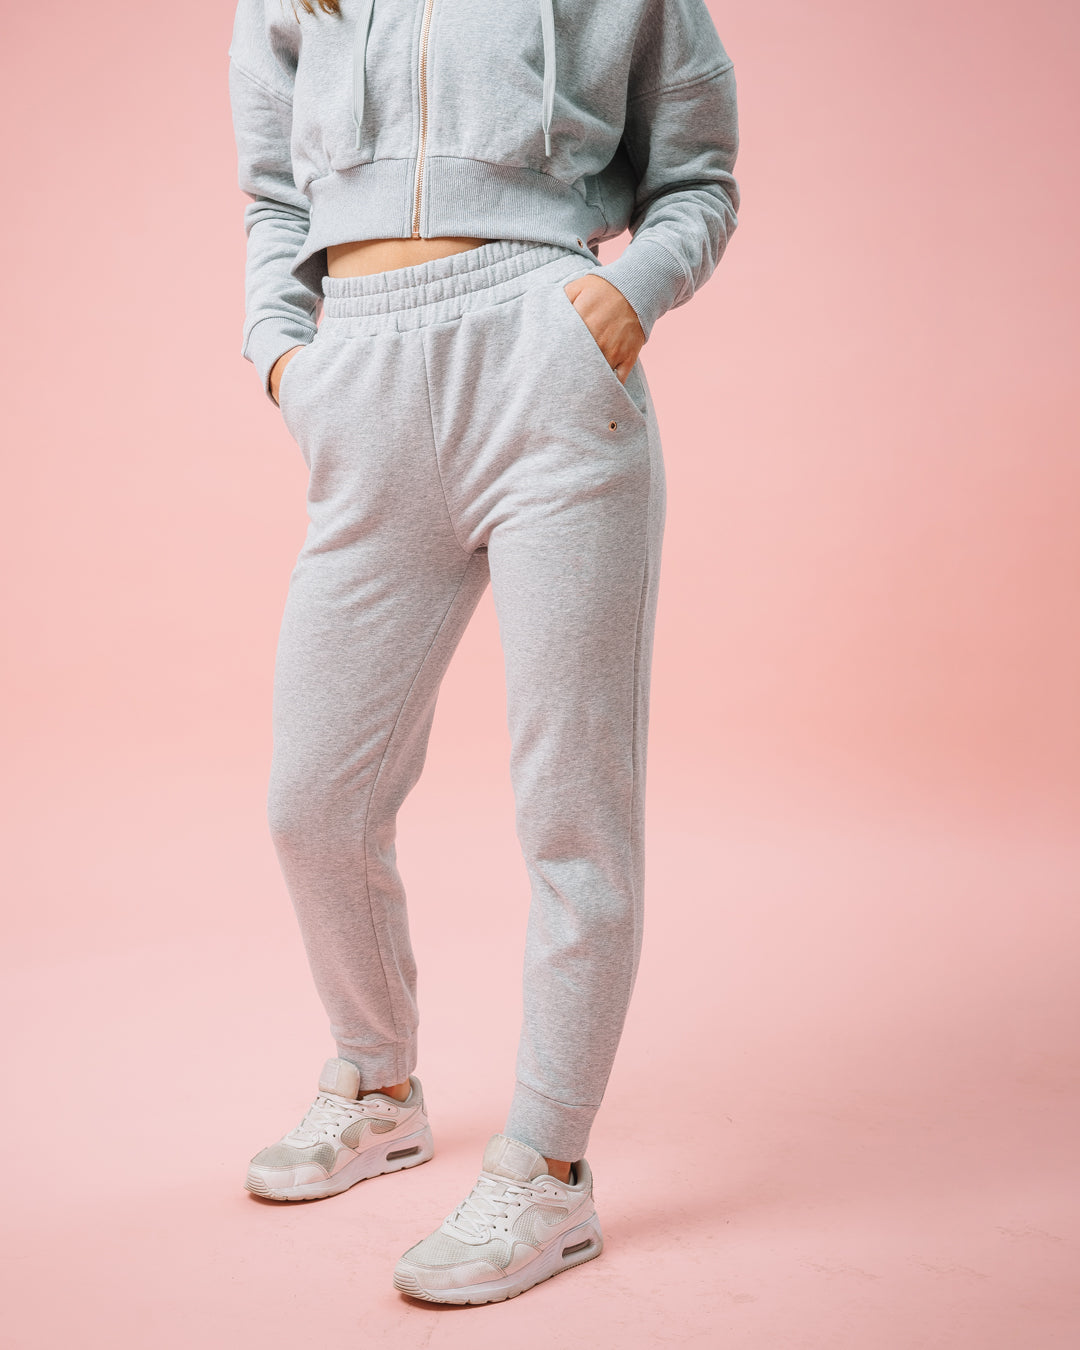 KADYLUXE® womens fleece sweatpant jogger in heather gray front close up view